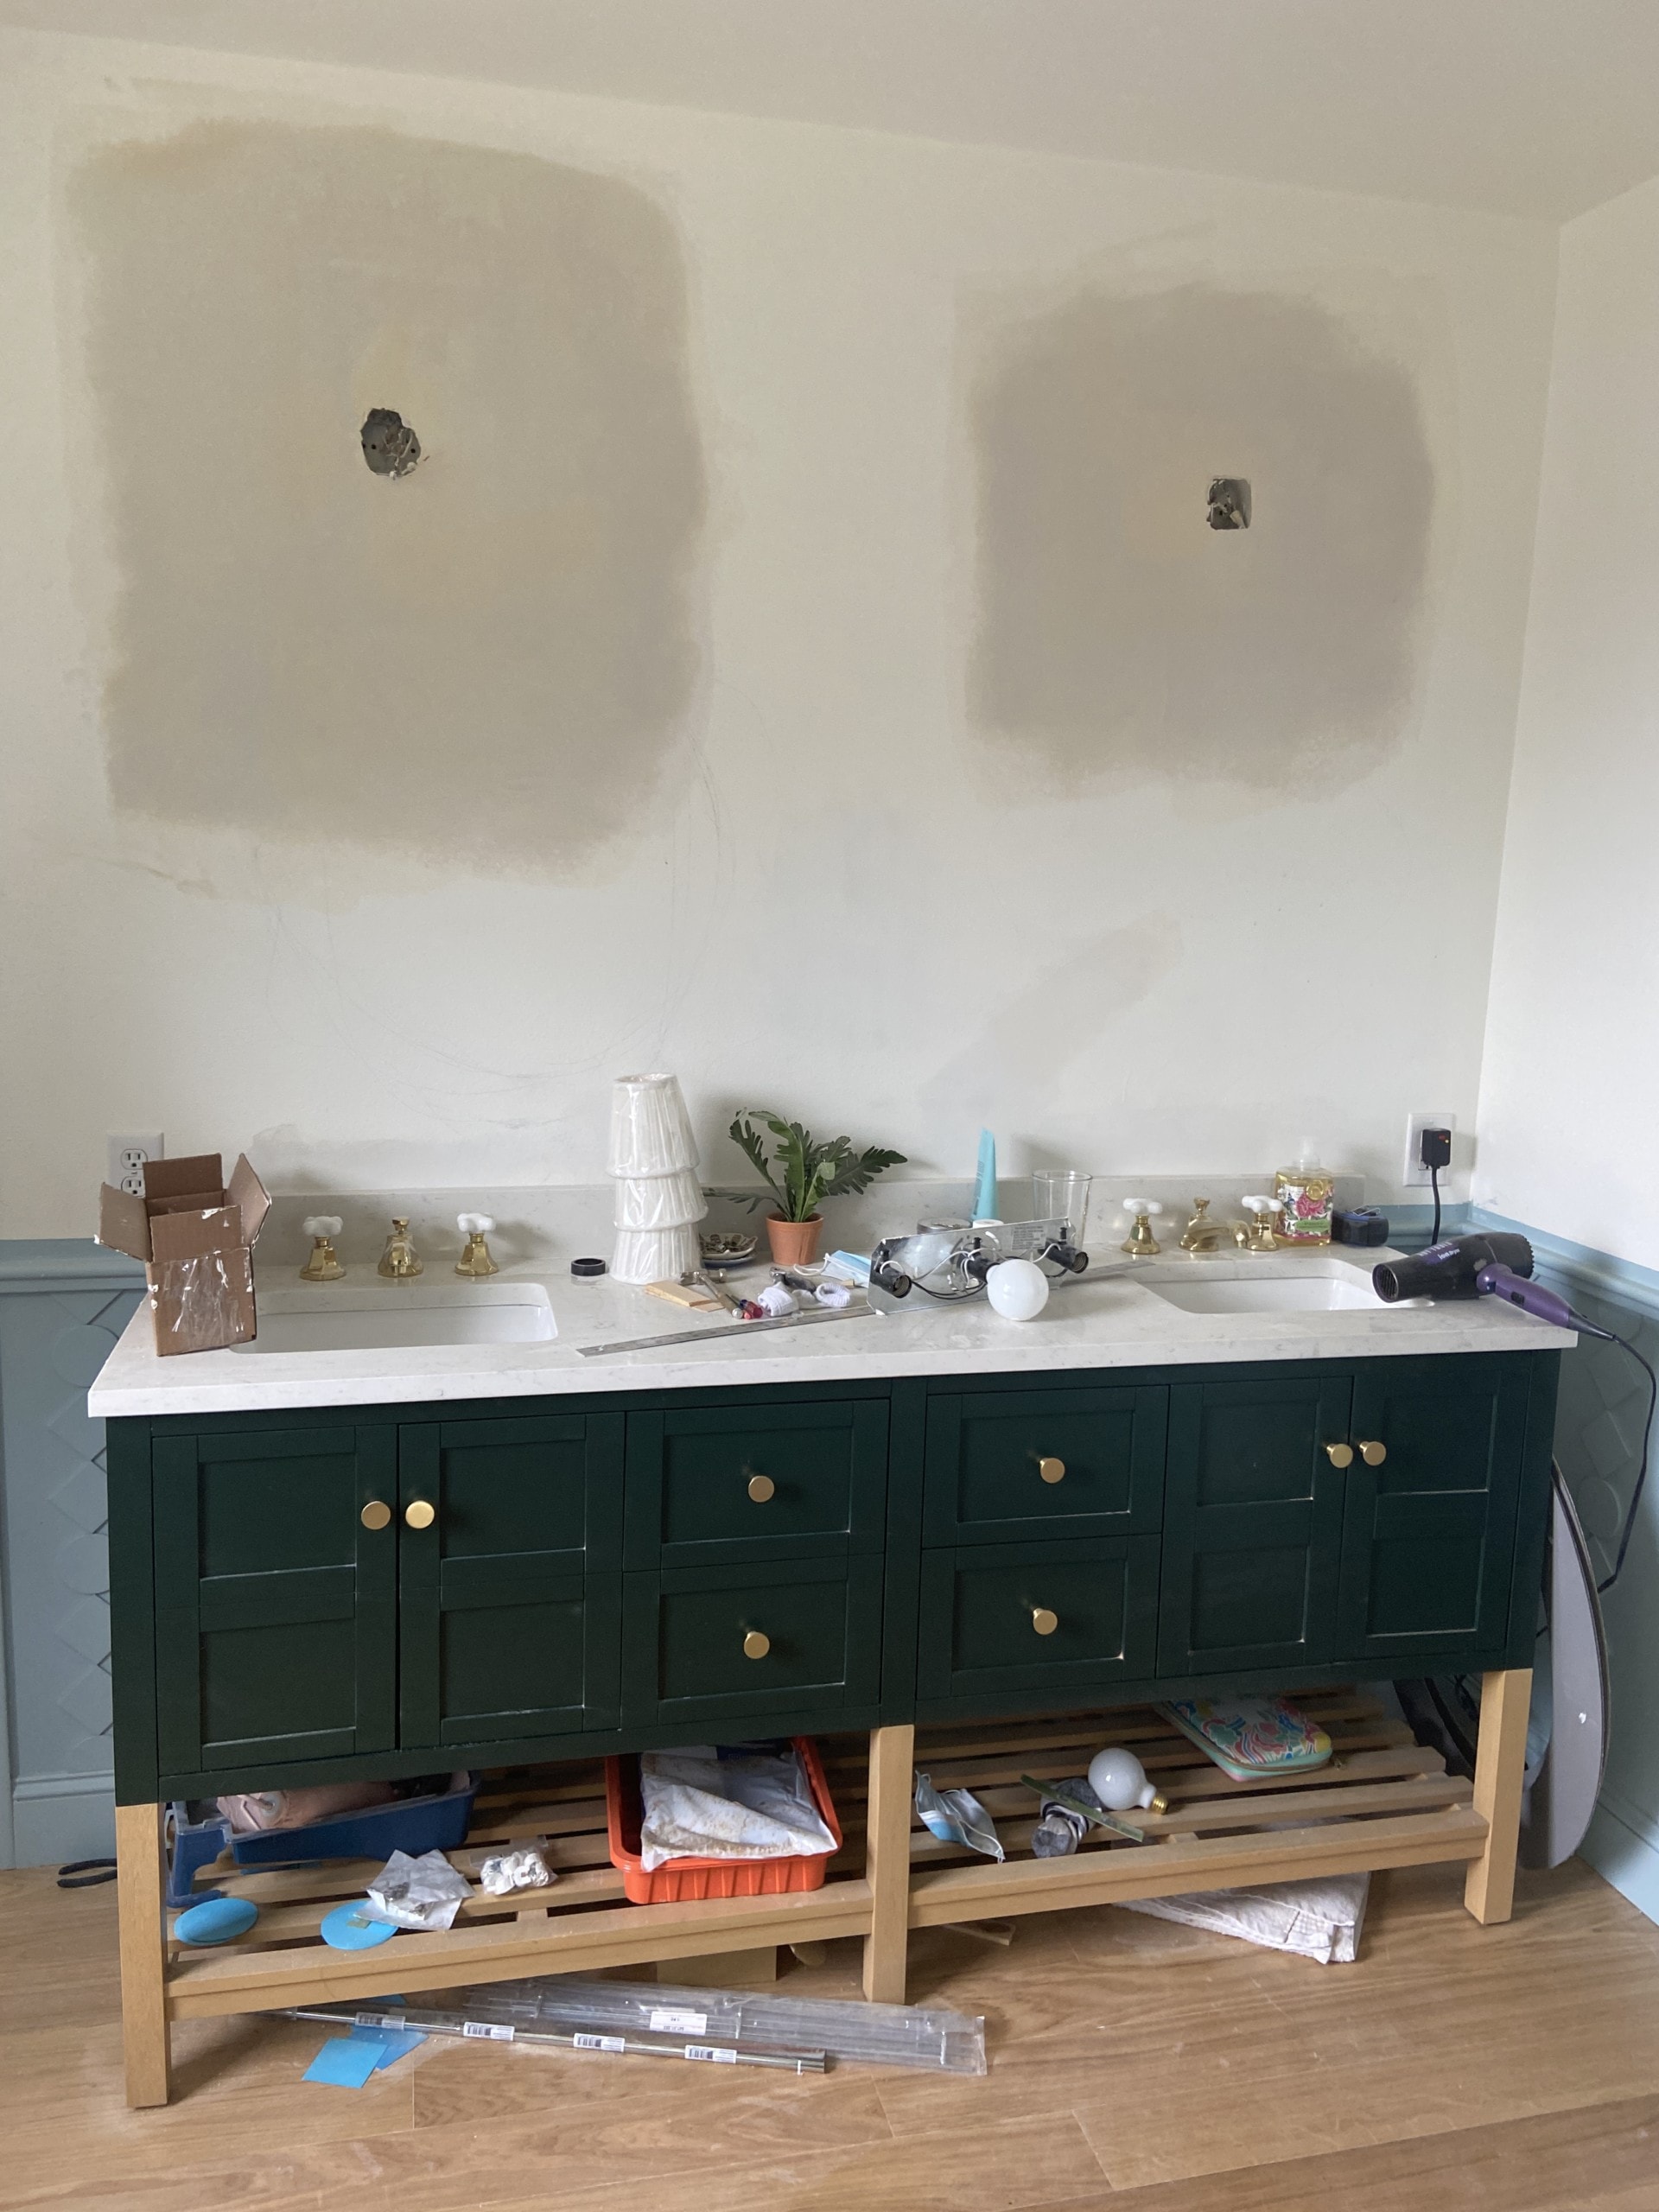 Emerald green vanity with clutter around and on it. The walls are mostly painted white, but are very unfinished.